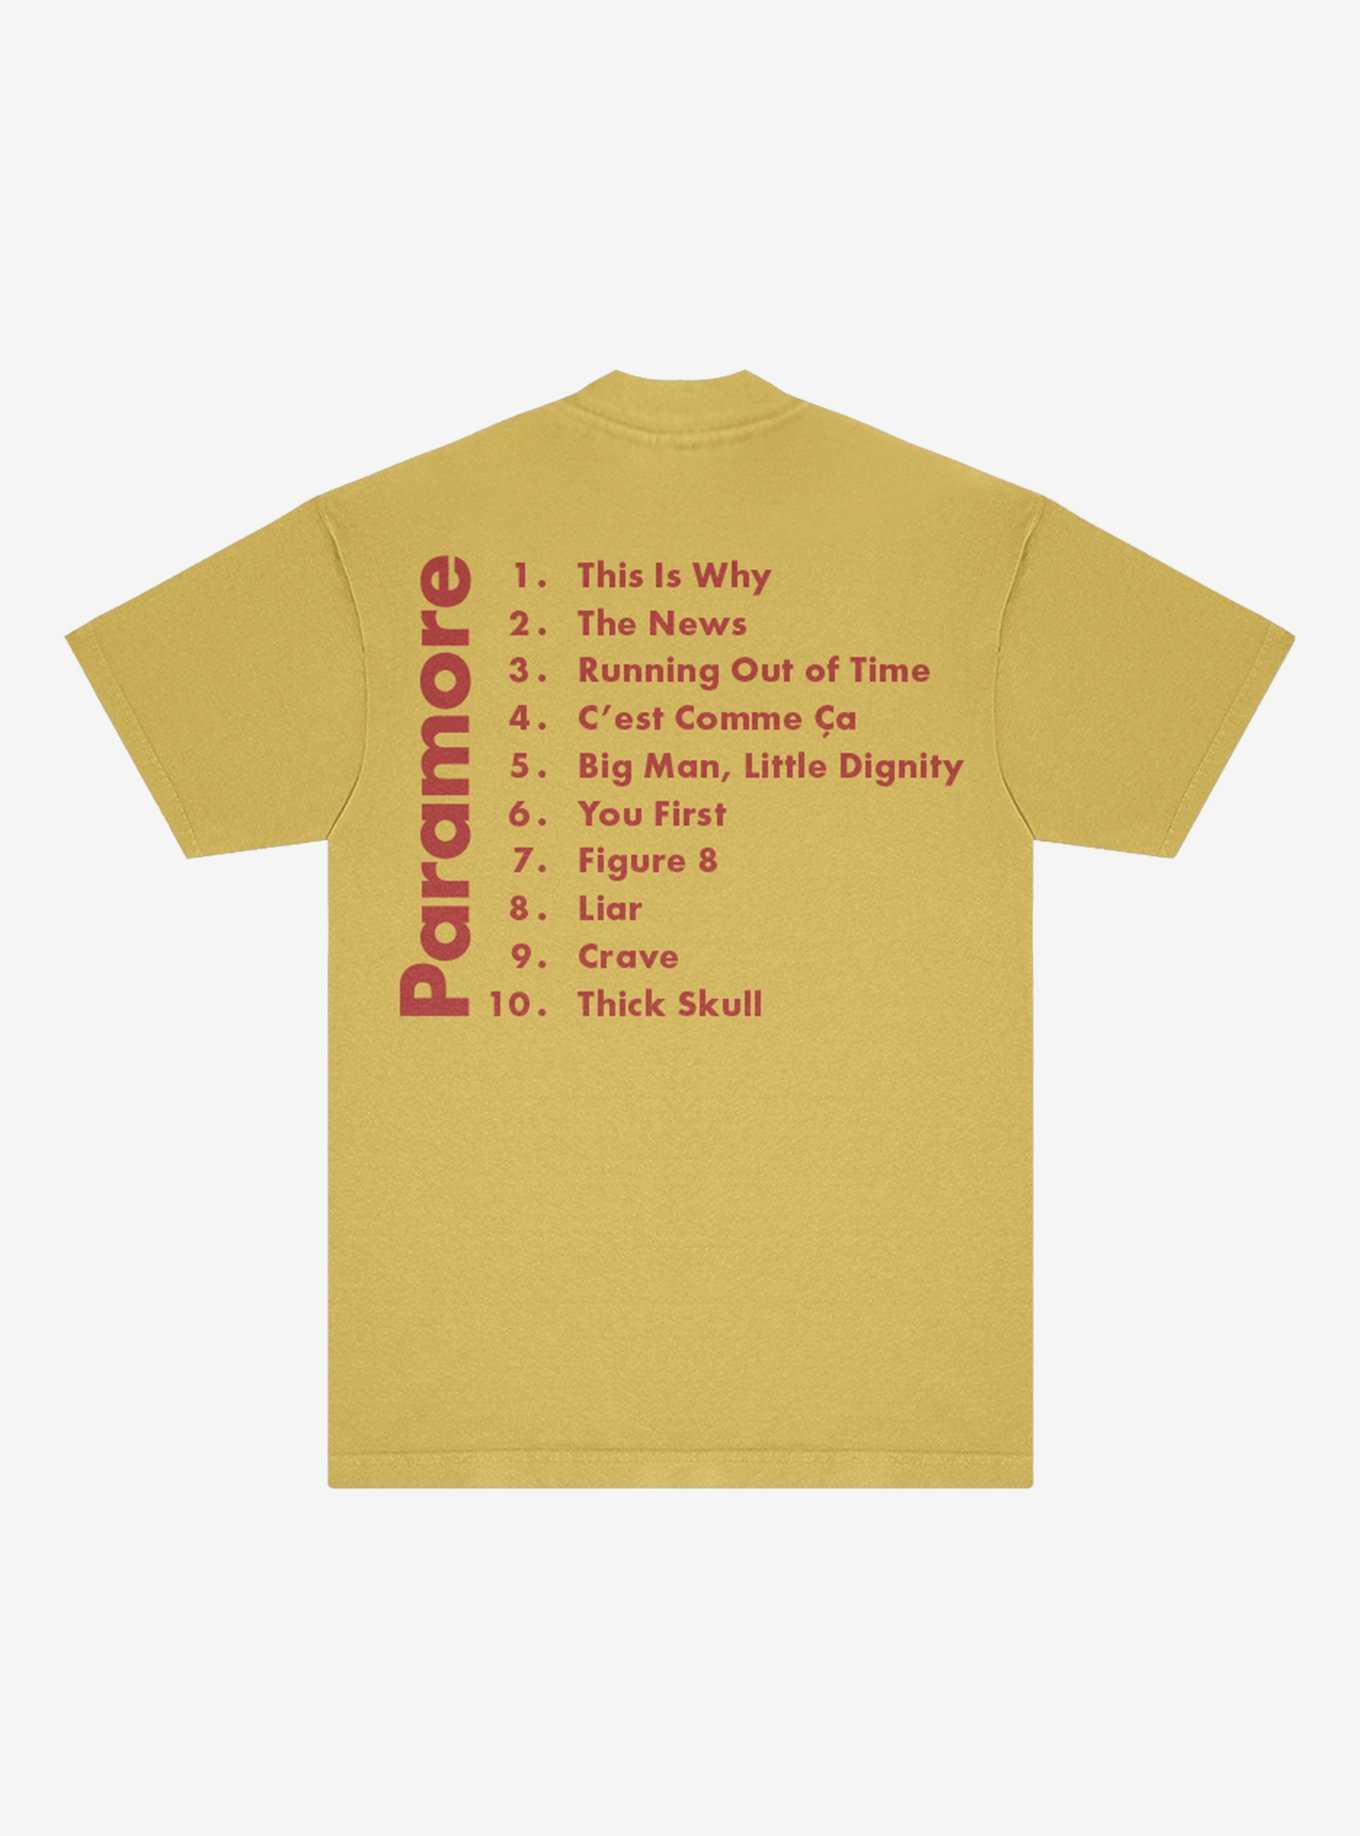 Paramore-Music.com on X: Two old Paramore merch tshirts are now